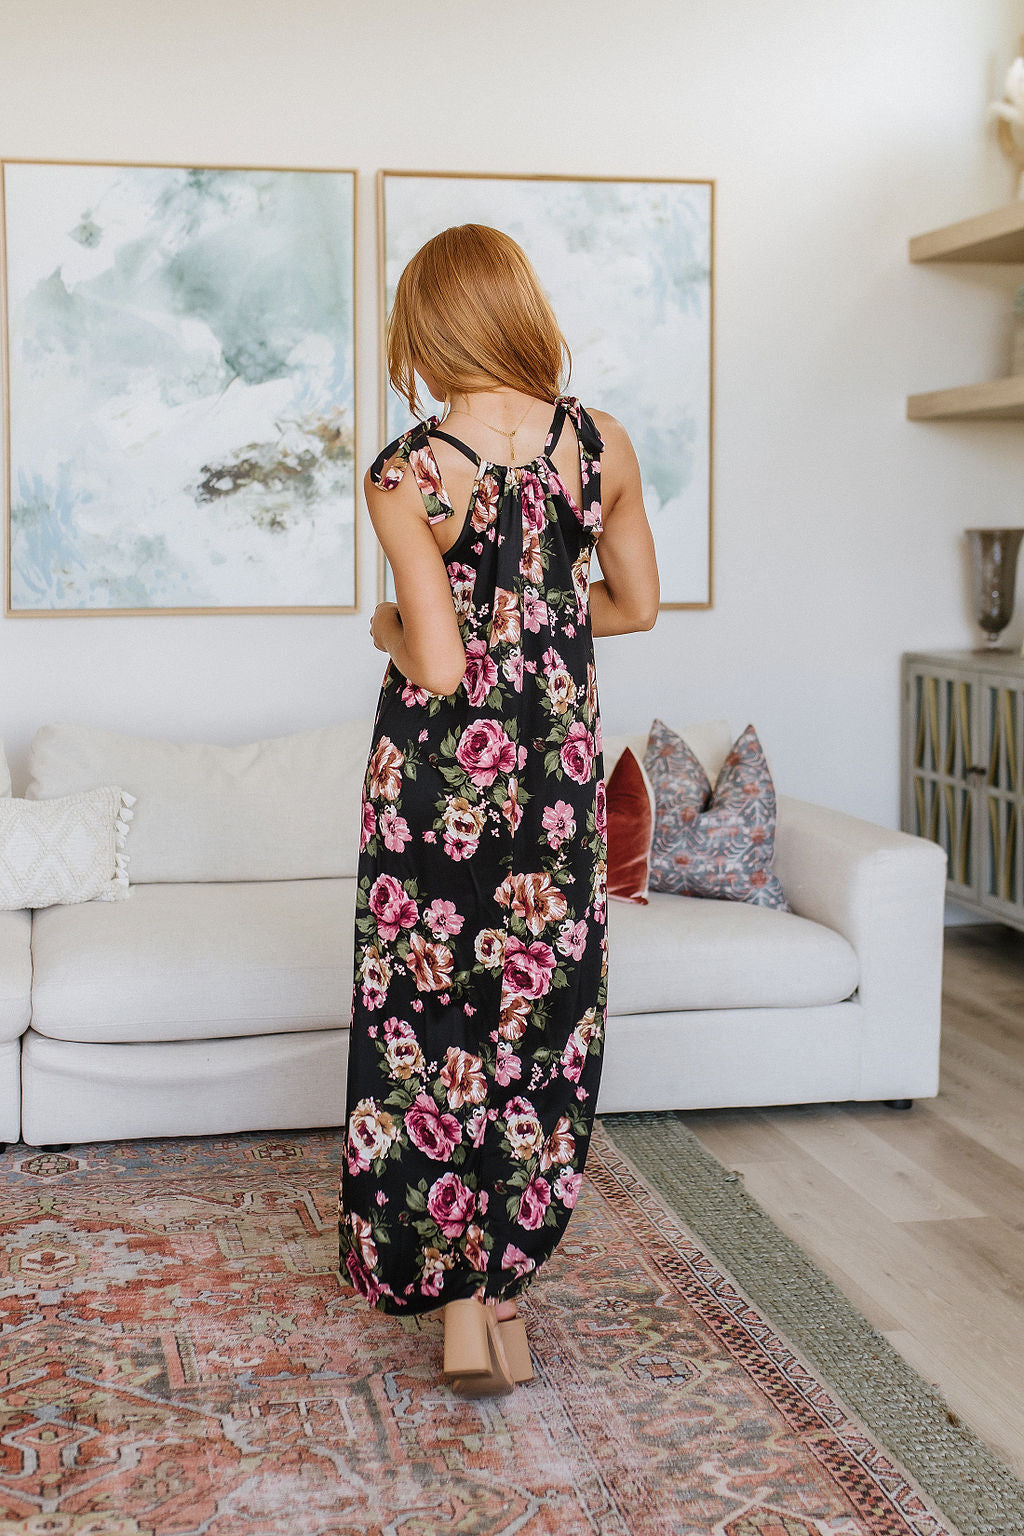 Fortuitous in Floral Maxi Dress - 6/16/2023